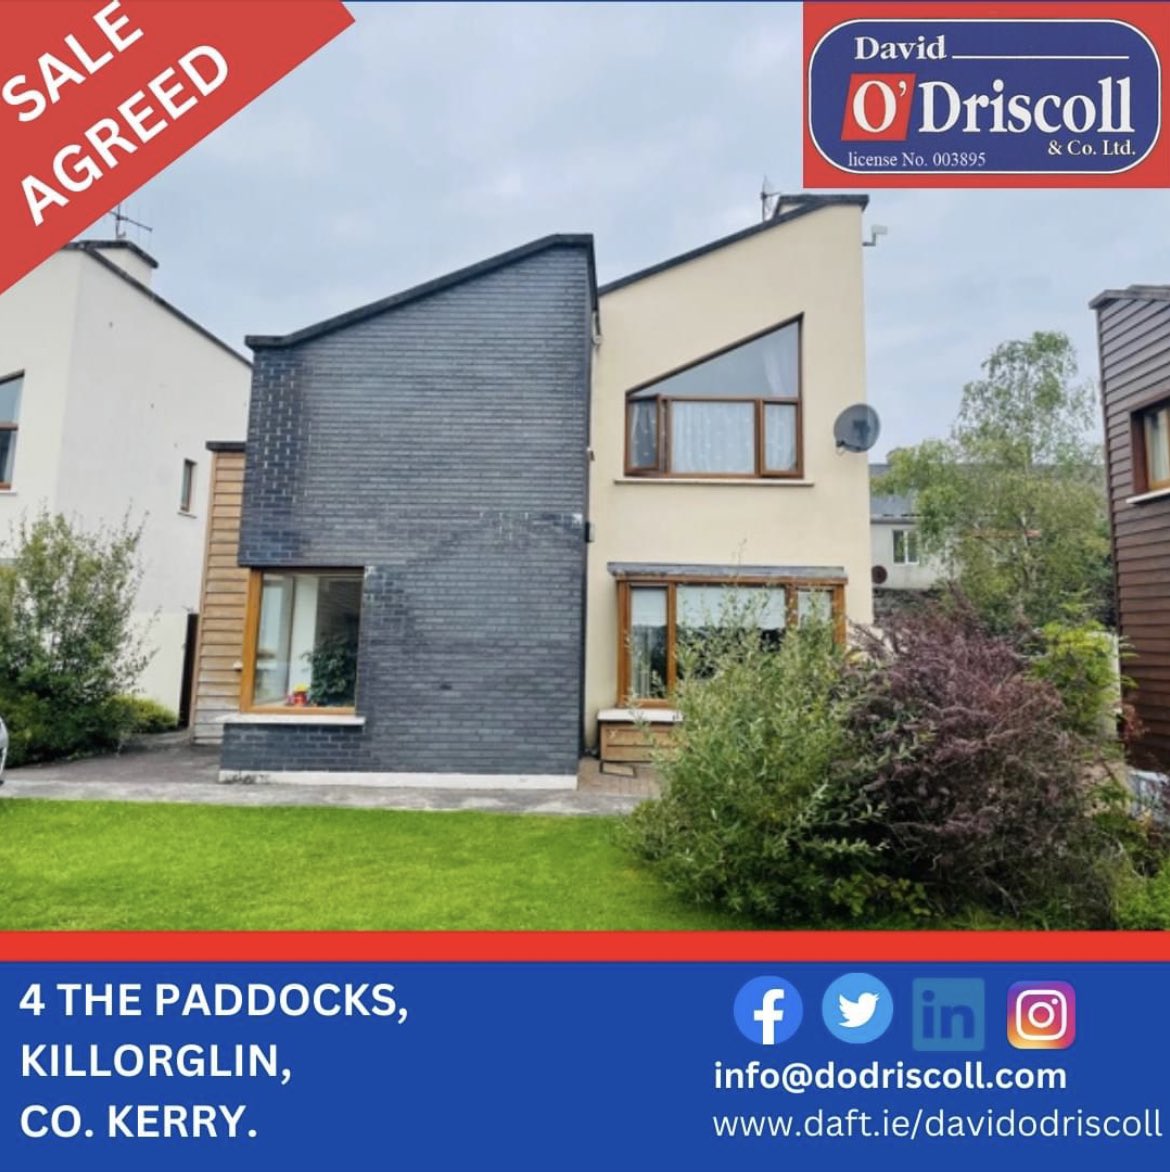 Just gone #saleagreed on this detached home in the centre of #killorglin.
If you have a property to sell, please contact David on 087-7958386 or e-mail: info@dodriscoll.com